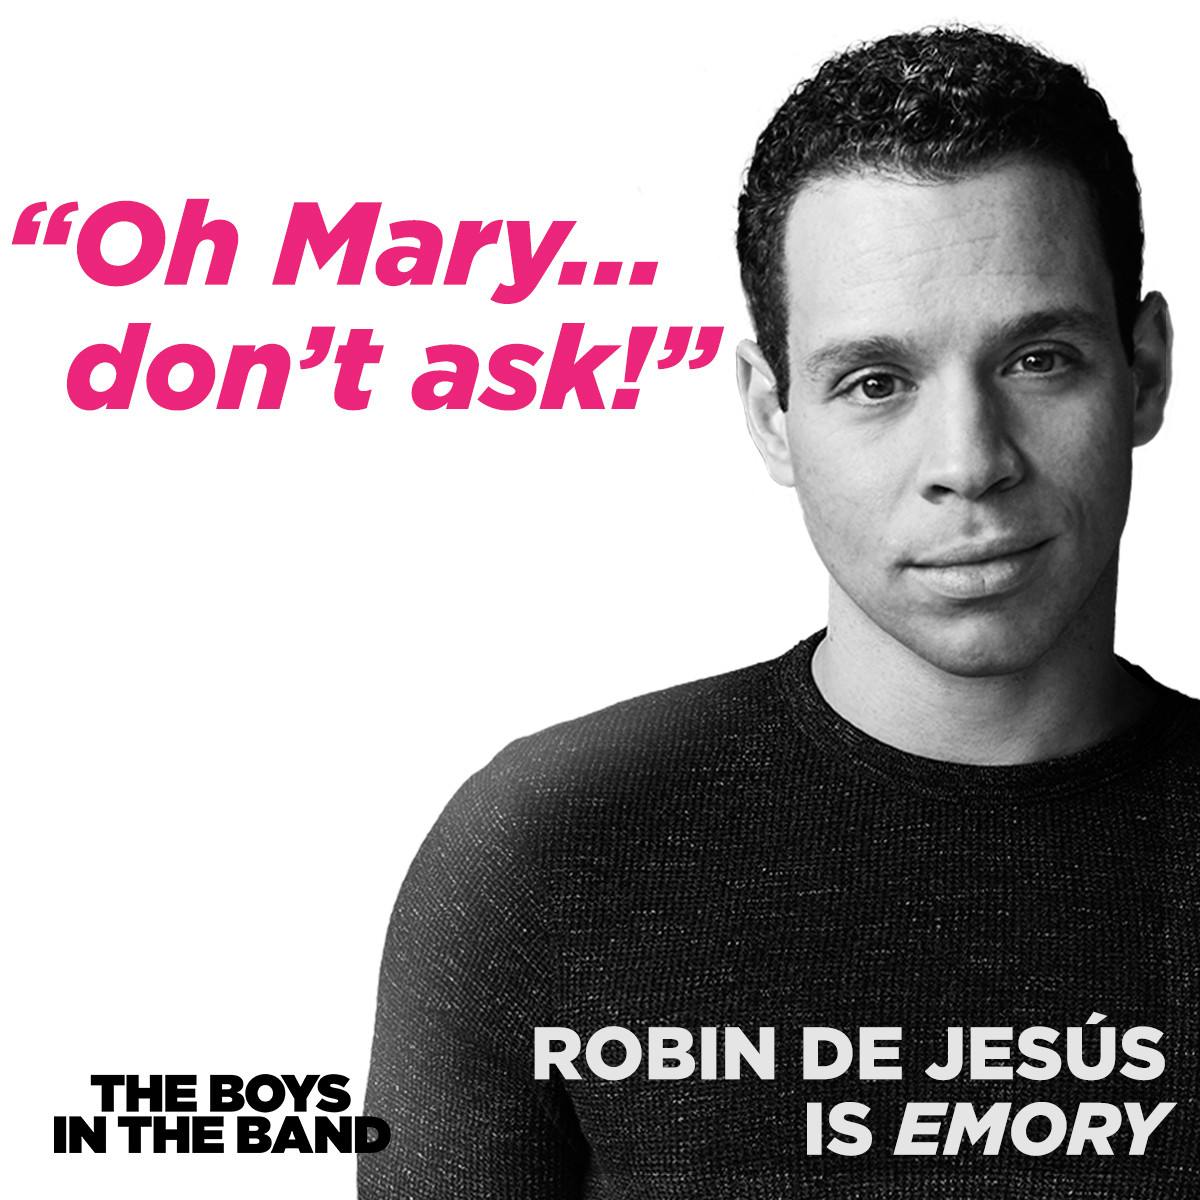 The Boys in the Band Broadway  Robin De Jesus  Emory Quote